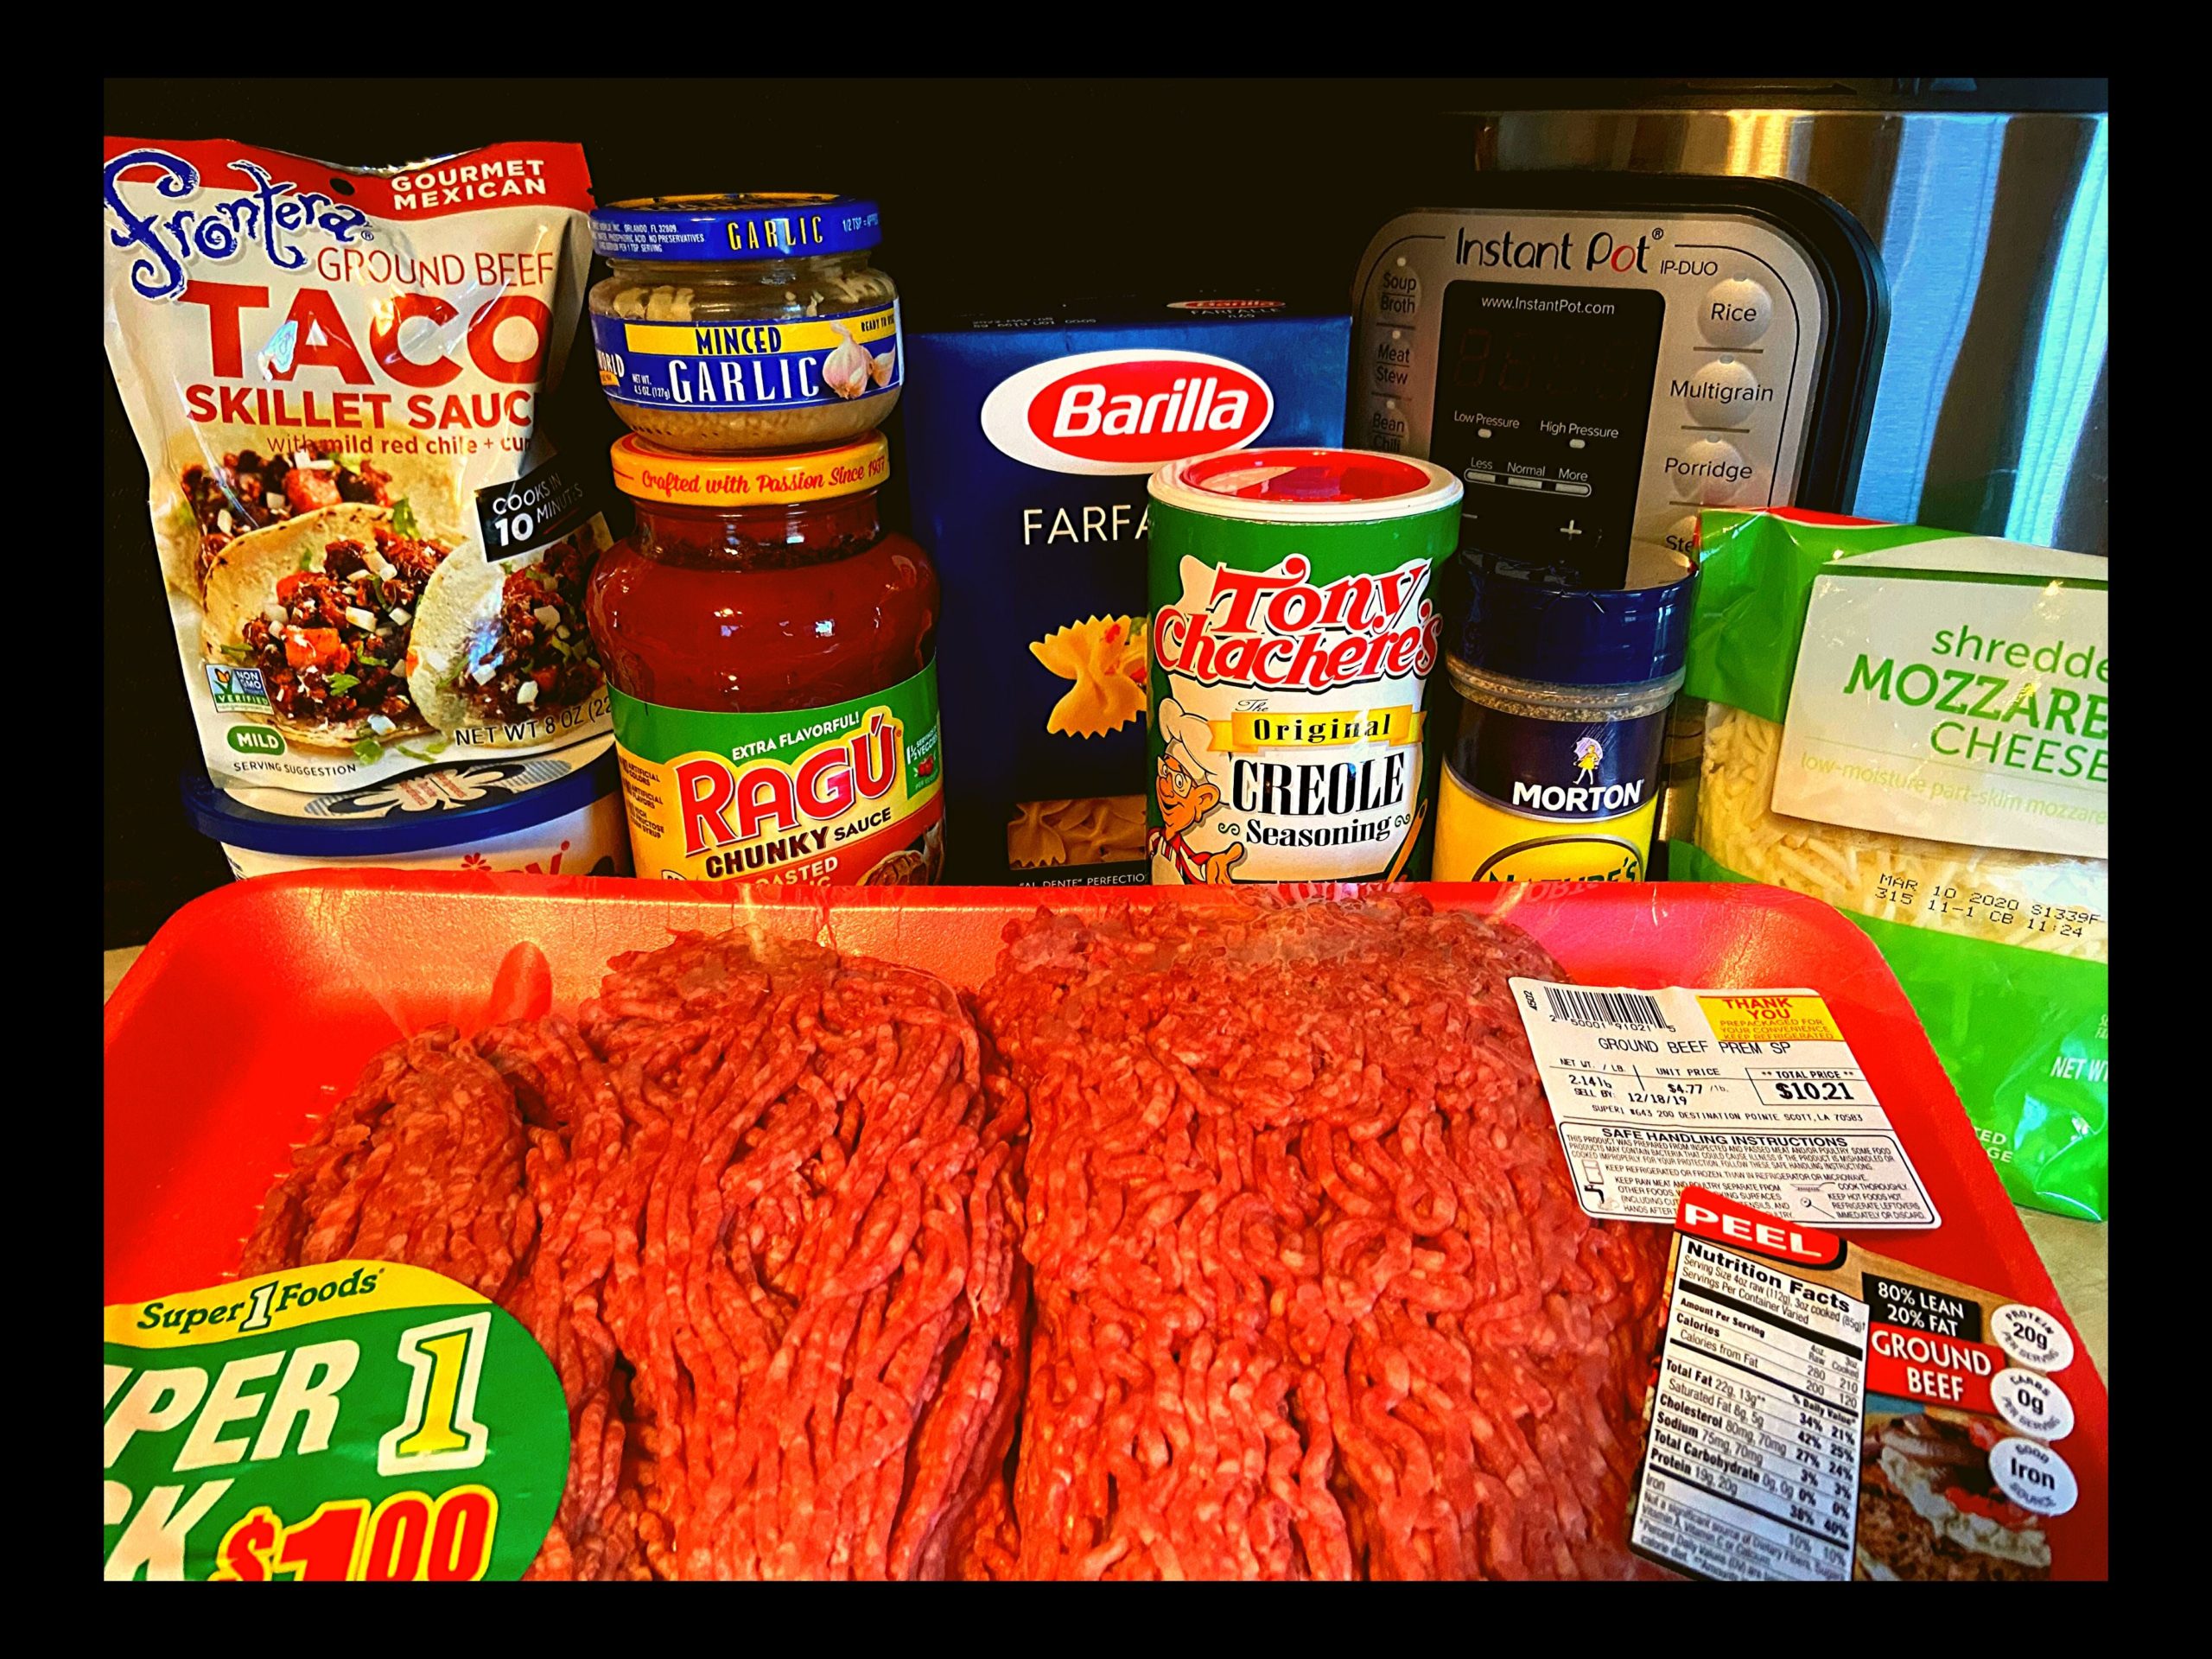 A packet of raw ground meat, frontera taco sauce packet, container of cottage cheese, container of minced garlic, ragu spaghetti sauce, box of bow tie pasta, tony chachere's seasoning, nature seasoning, and shredded mozzerela cheese all sitting on a kitchen counter top in front of an Instant Pot.